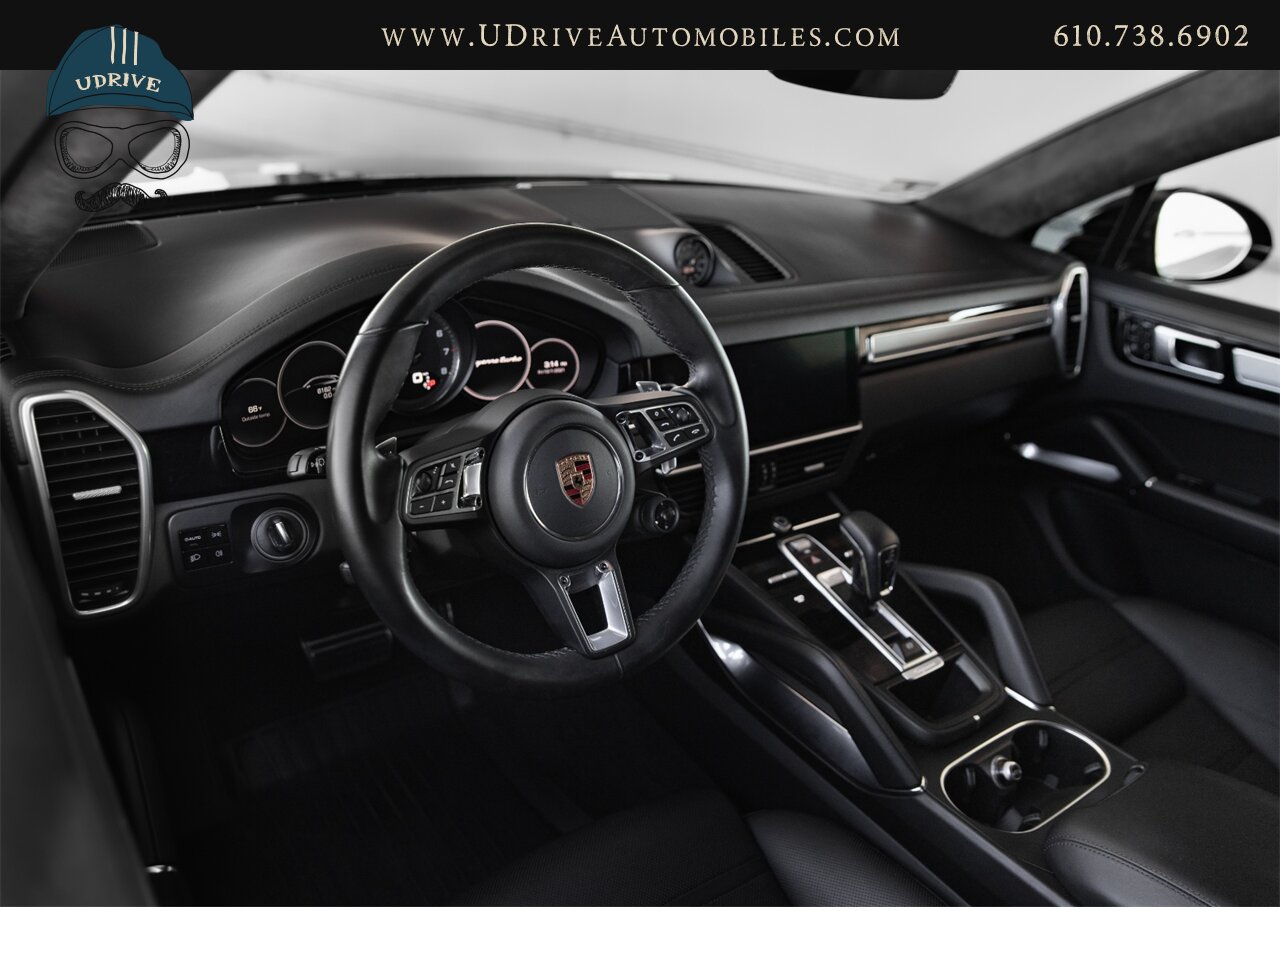 2020 Porsche Cayenne Turbo Coupe 2+1 Rear Comf Seats Prem Plus  22in Turbo Design Whls Sport Exhst Adap Cruise Surround View - Photo 28 - West Chester, PA 19382